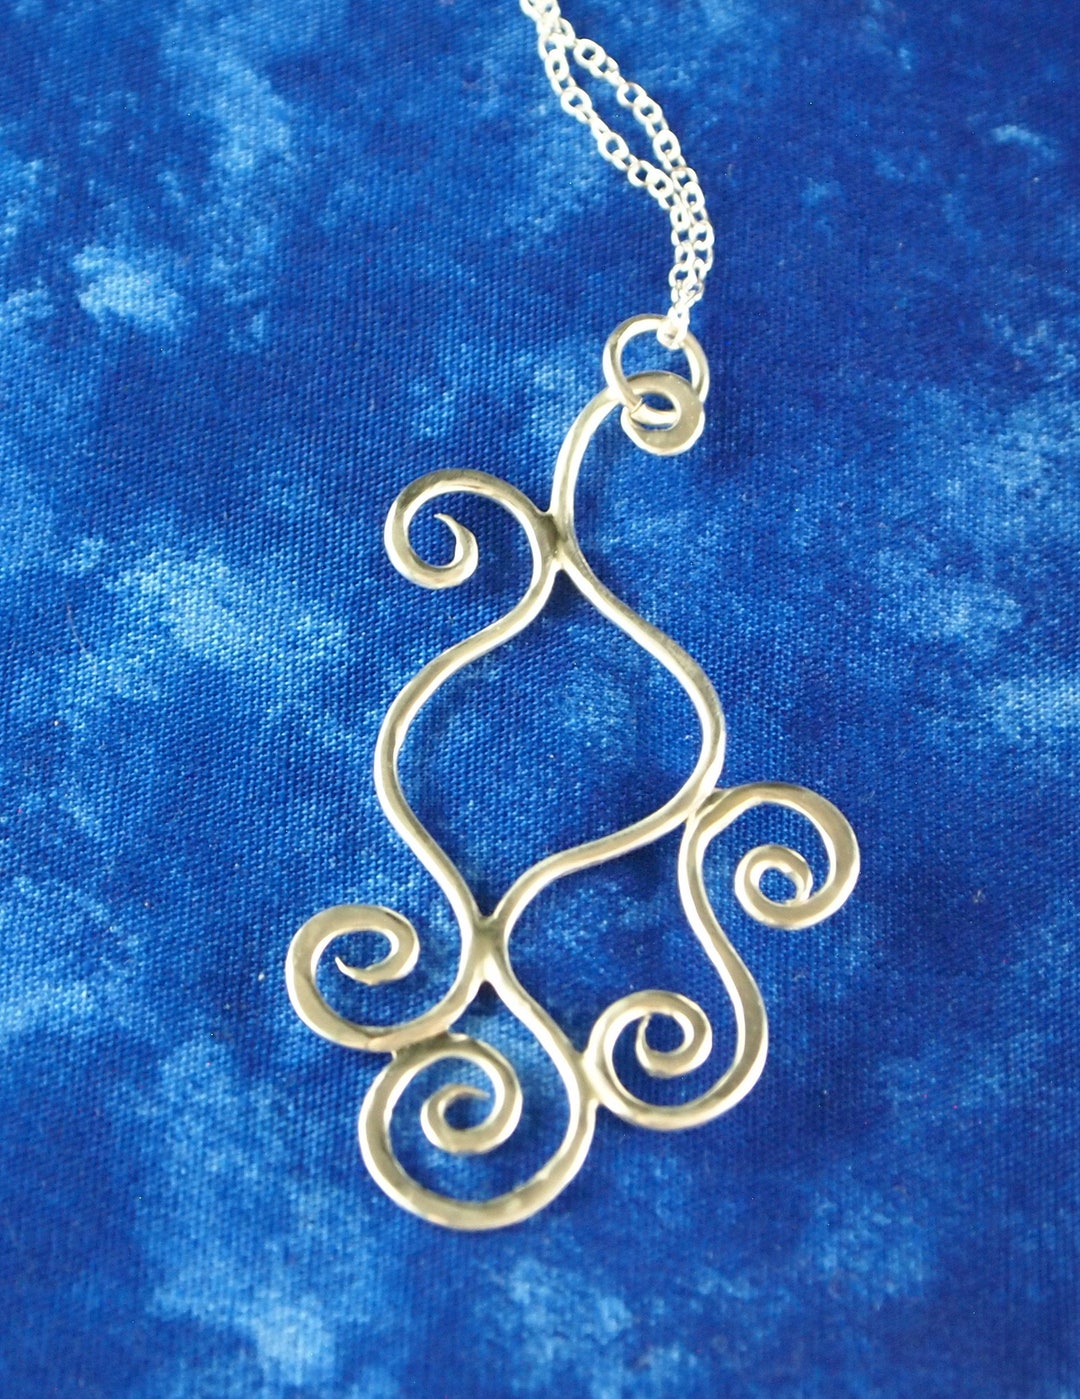 Sterling Silver Scroll Pendant and Chain - Etsy